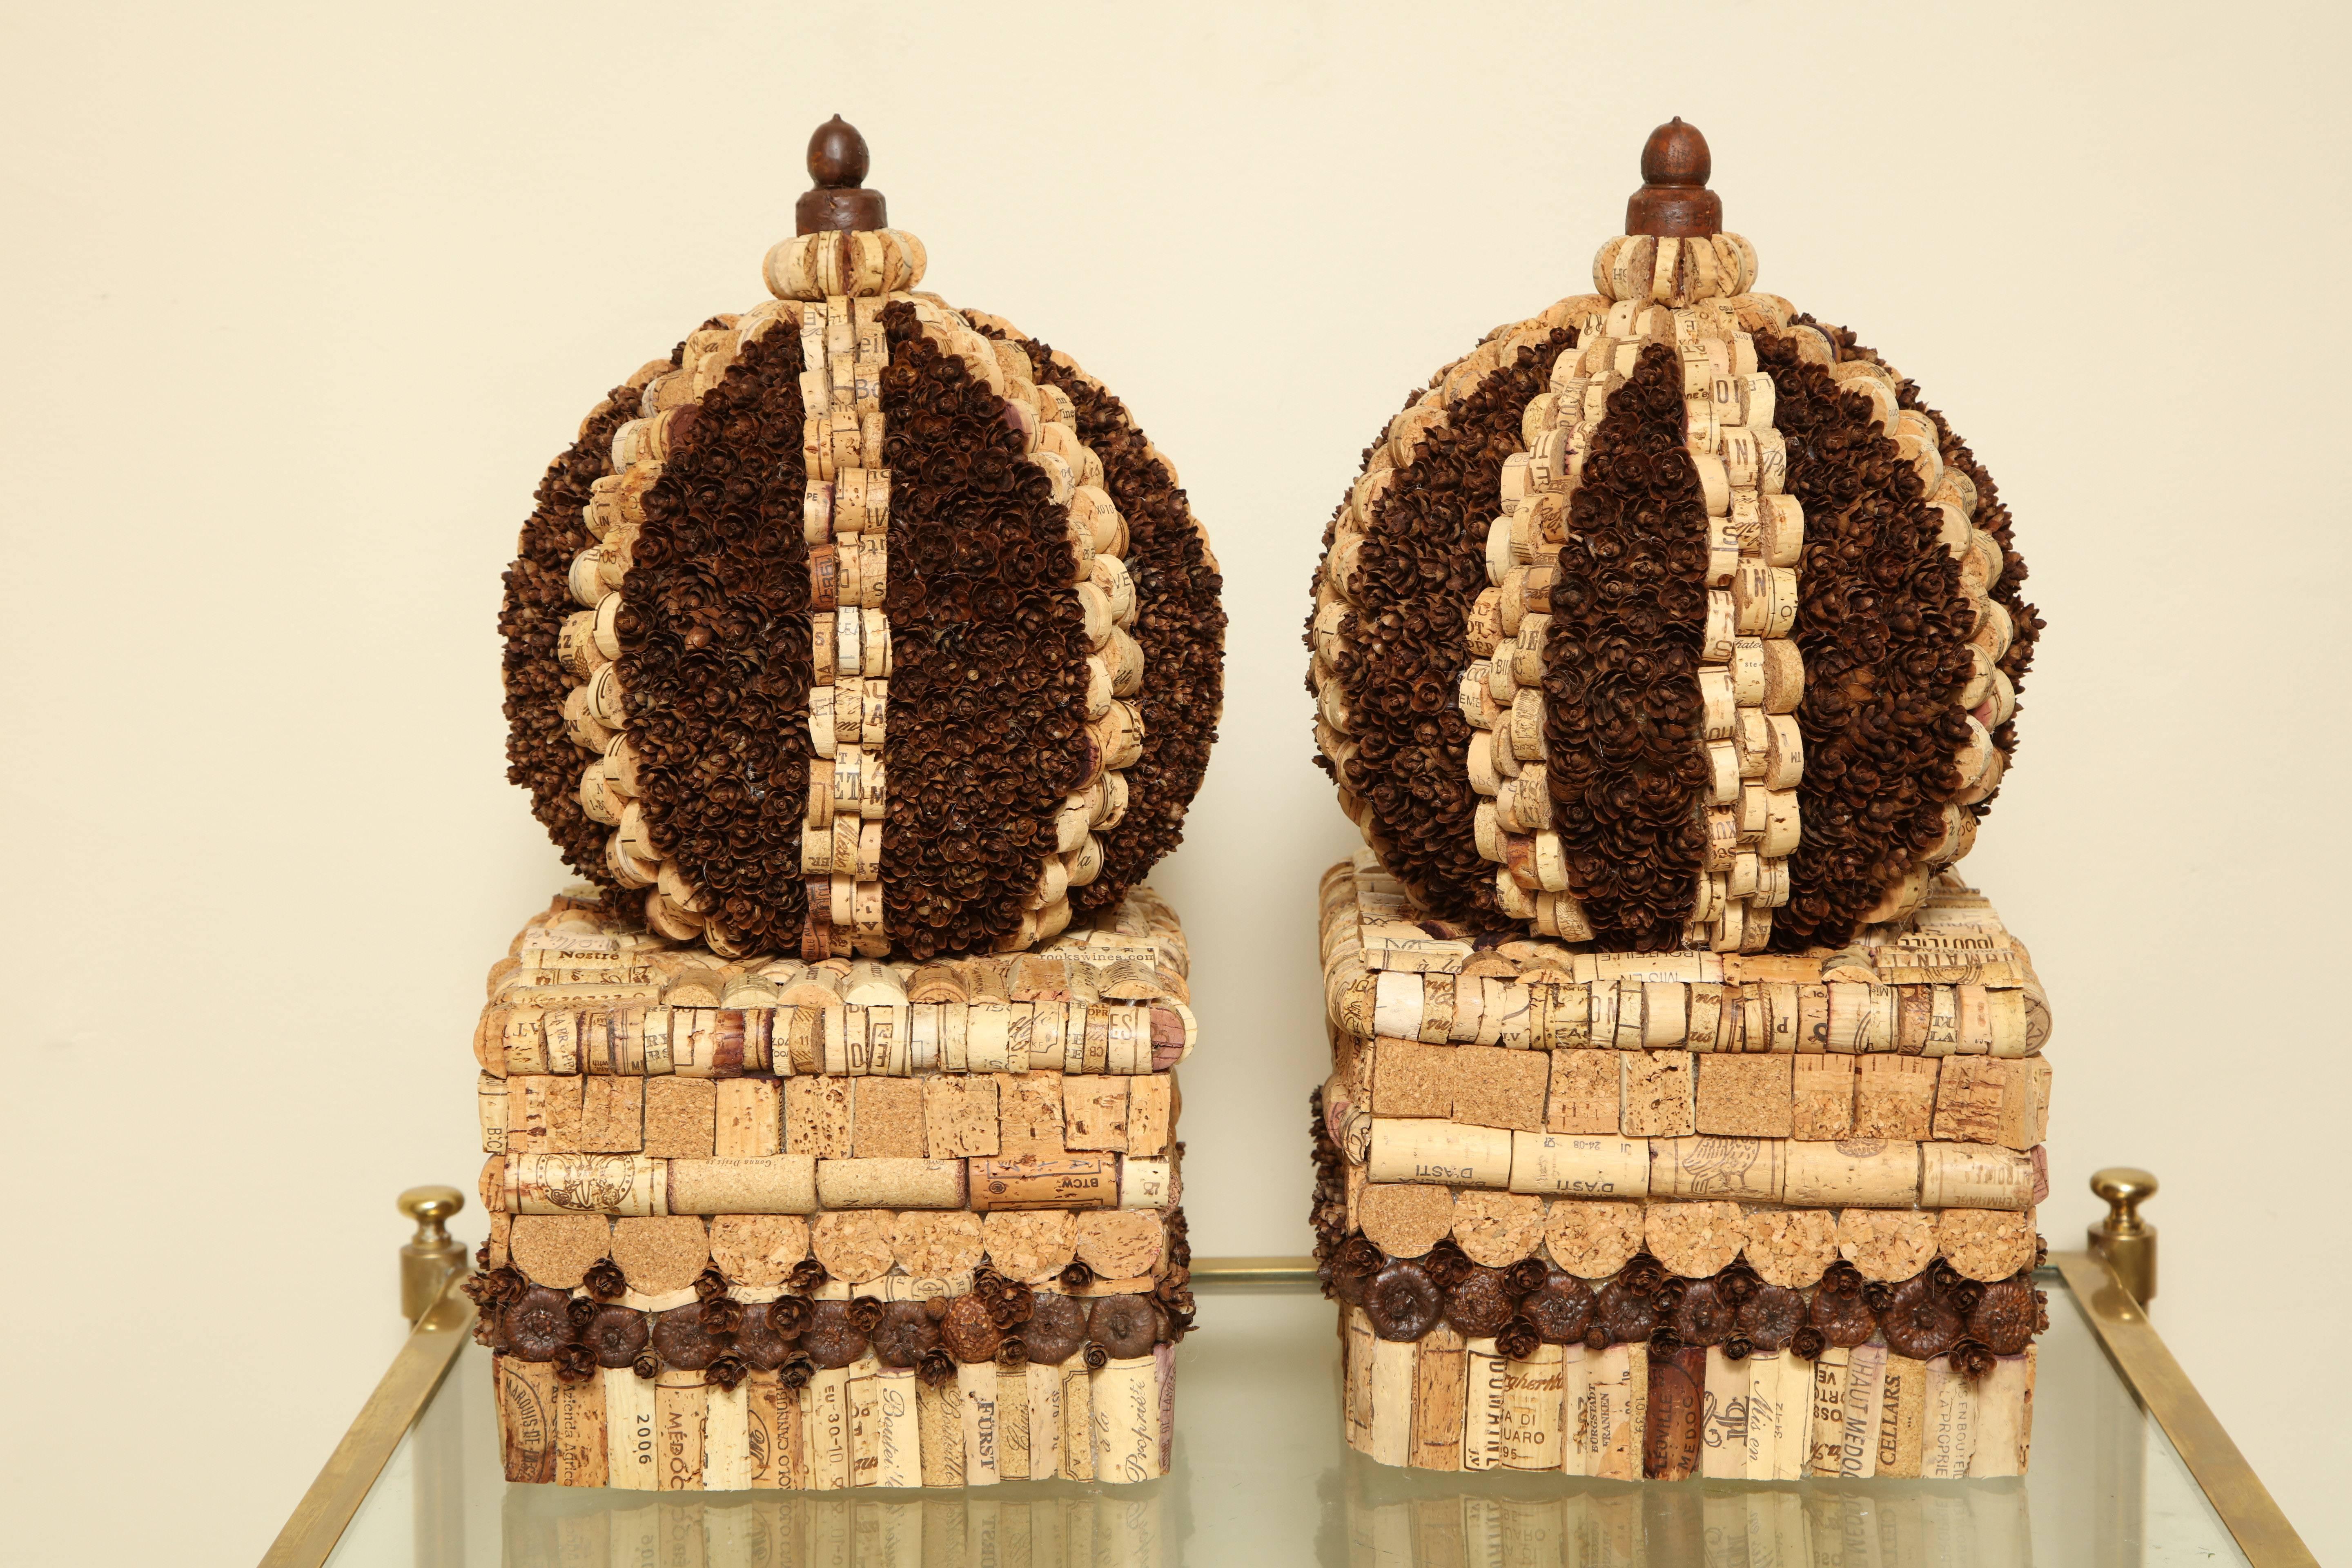 With a nod to Tramp Art, McEvoy takes spliced wine bottle corks, pinecones, and acorns to build out her architectural creations in her signature color palette of natural, white, black and red. 

Marian McEvoy lived in Paris from 1975 to 1990,